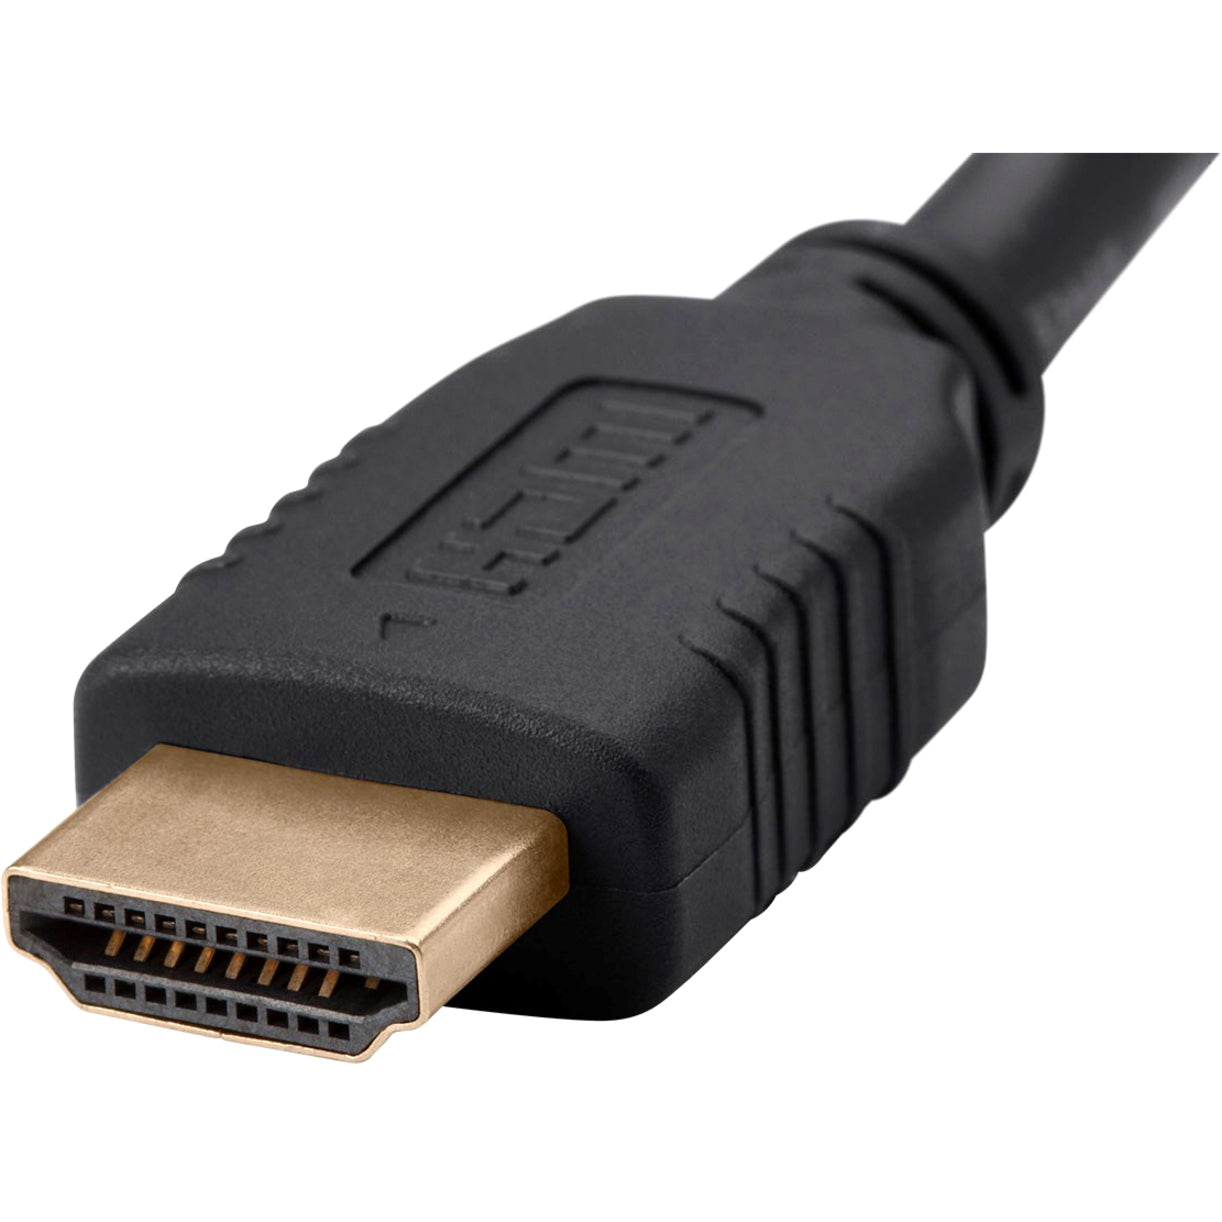 Monoprice 3871 Select Series High Speed HDMI Cable, 3ft Black, Audio Return Channel (ARC)